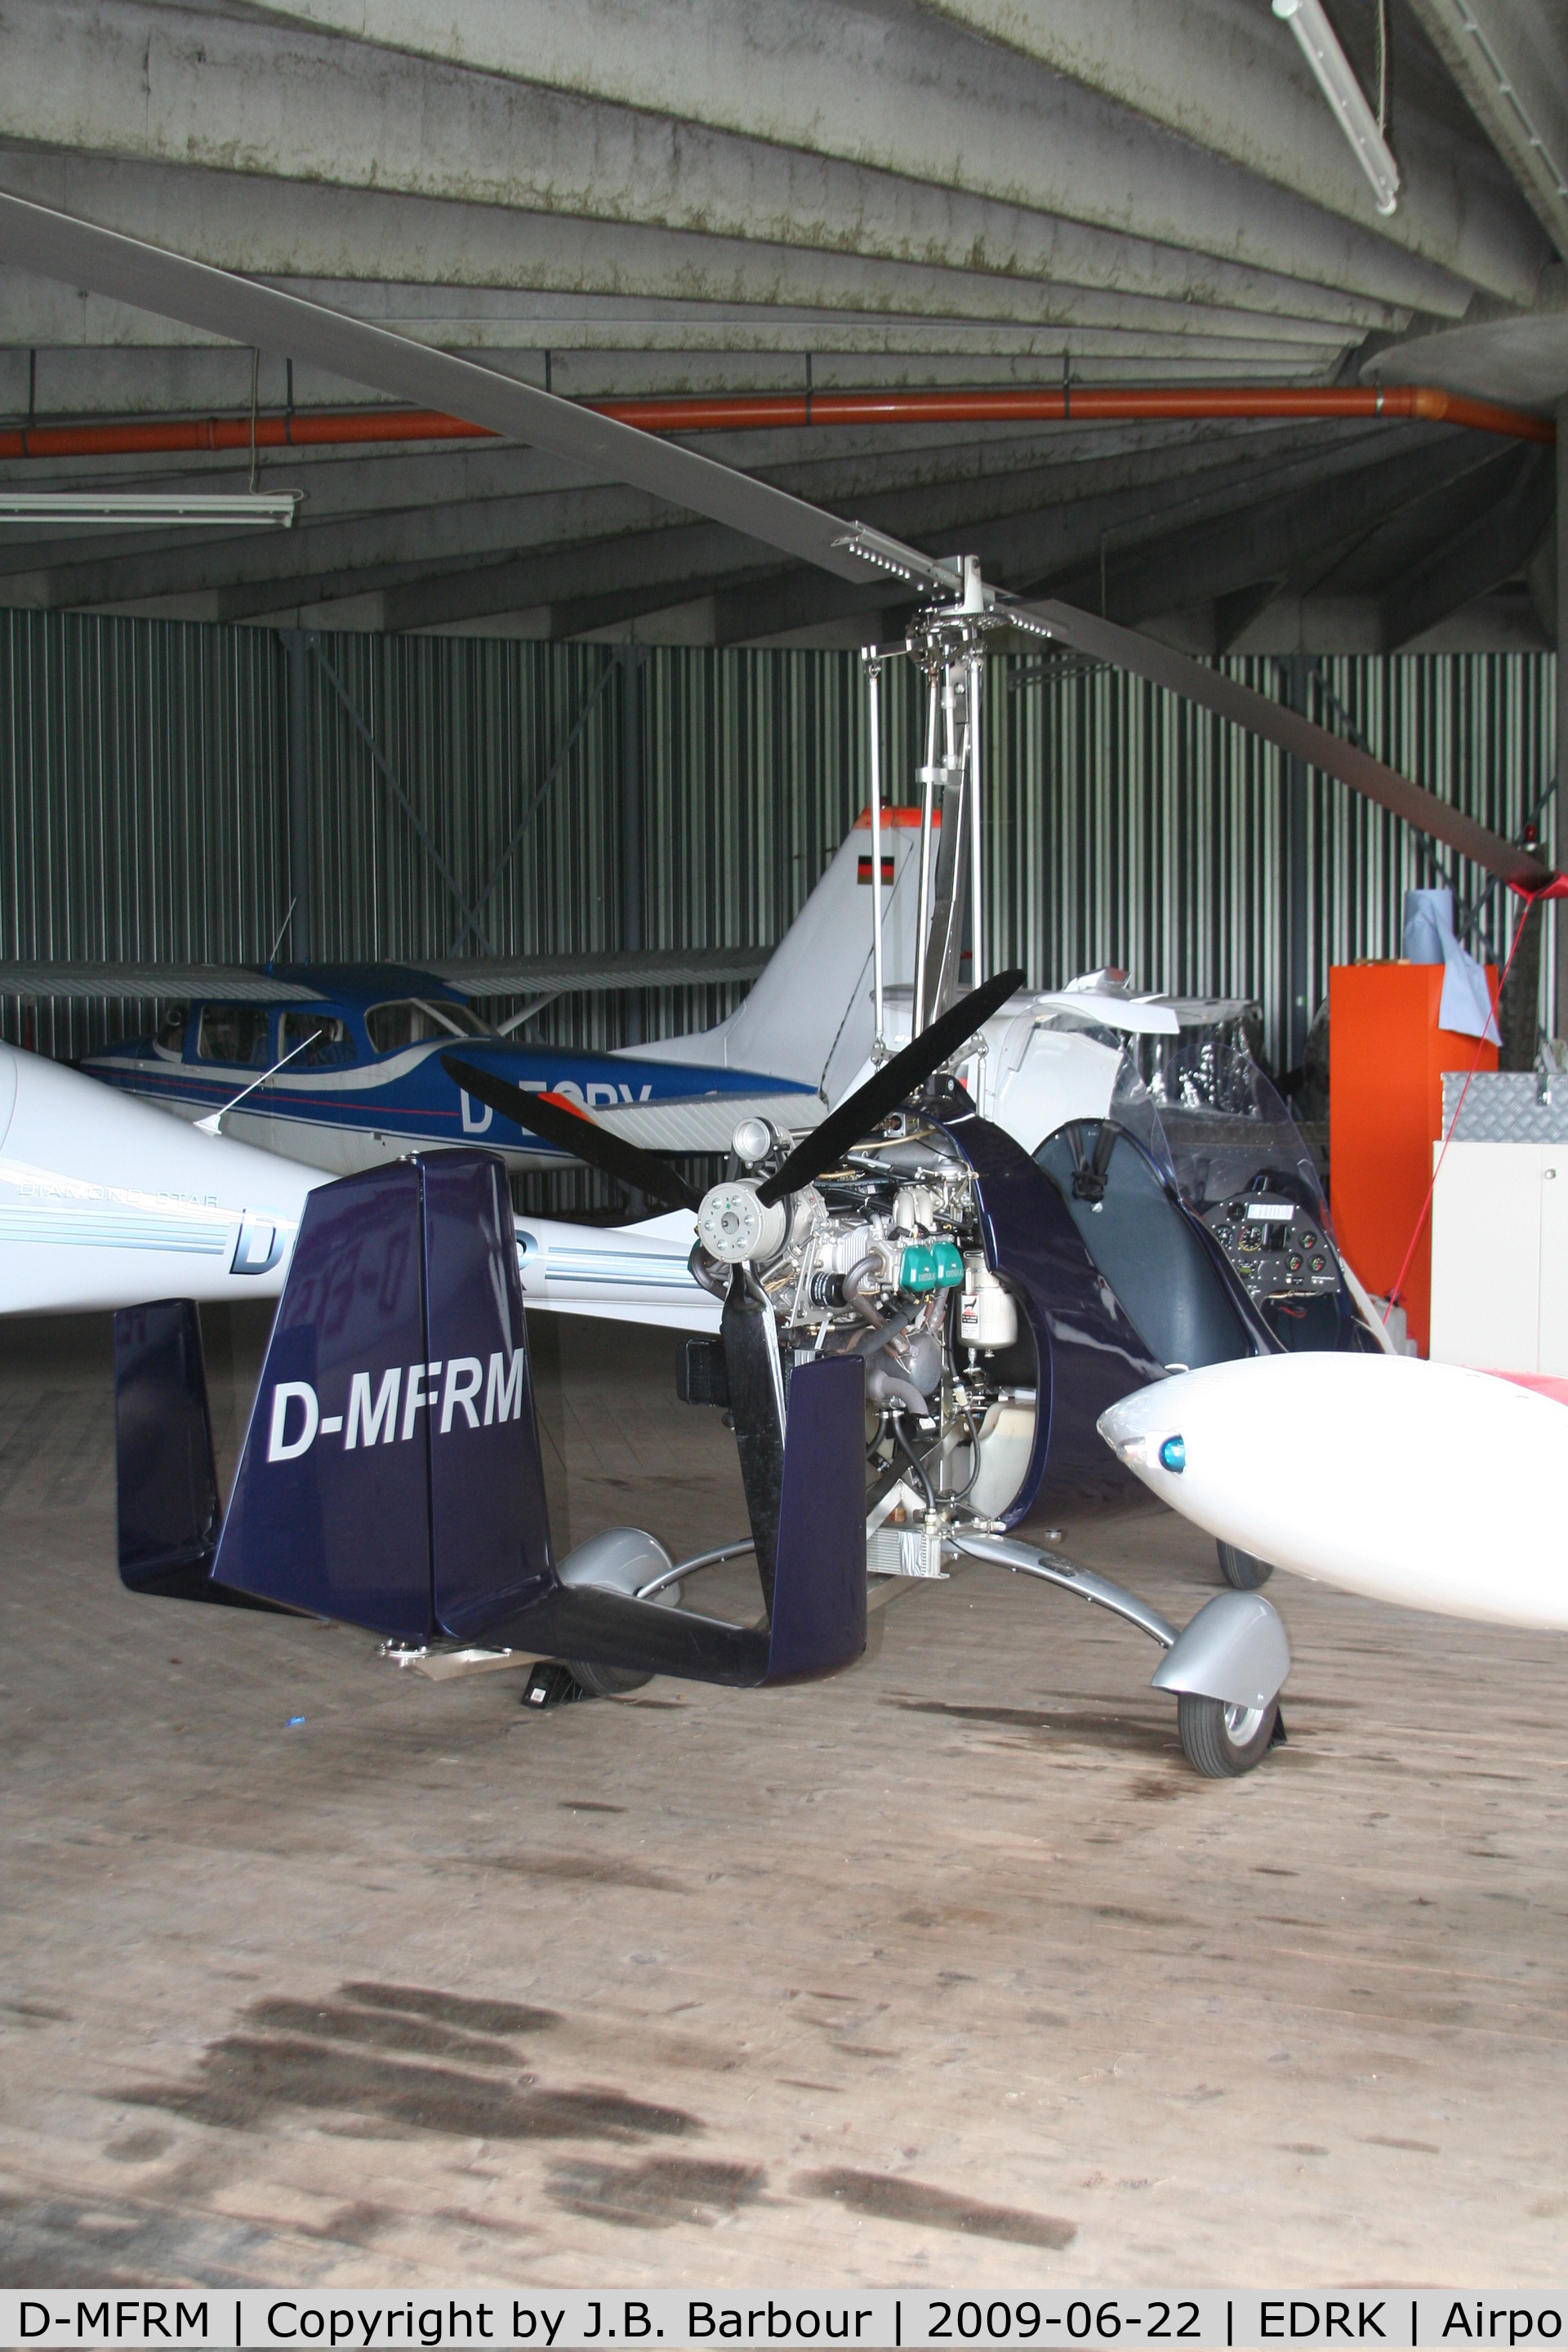 D-MFRM, AutoGyro MT-03 C/N Not found D-MFRM, Not sure of the make here